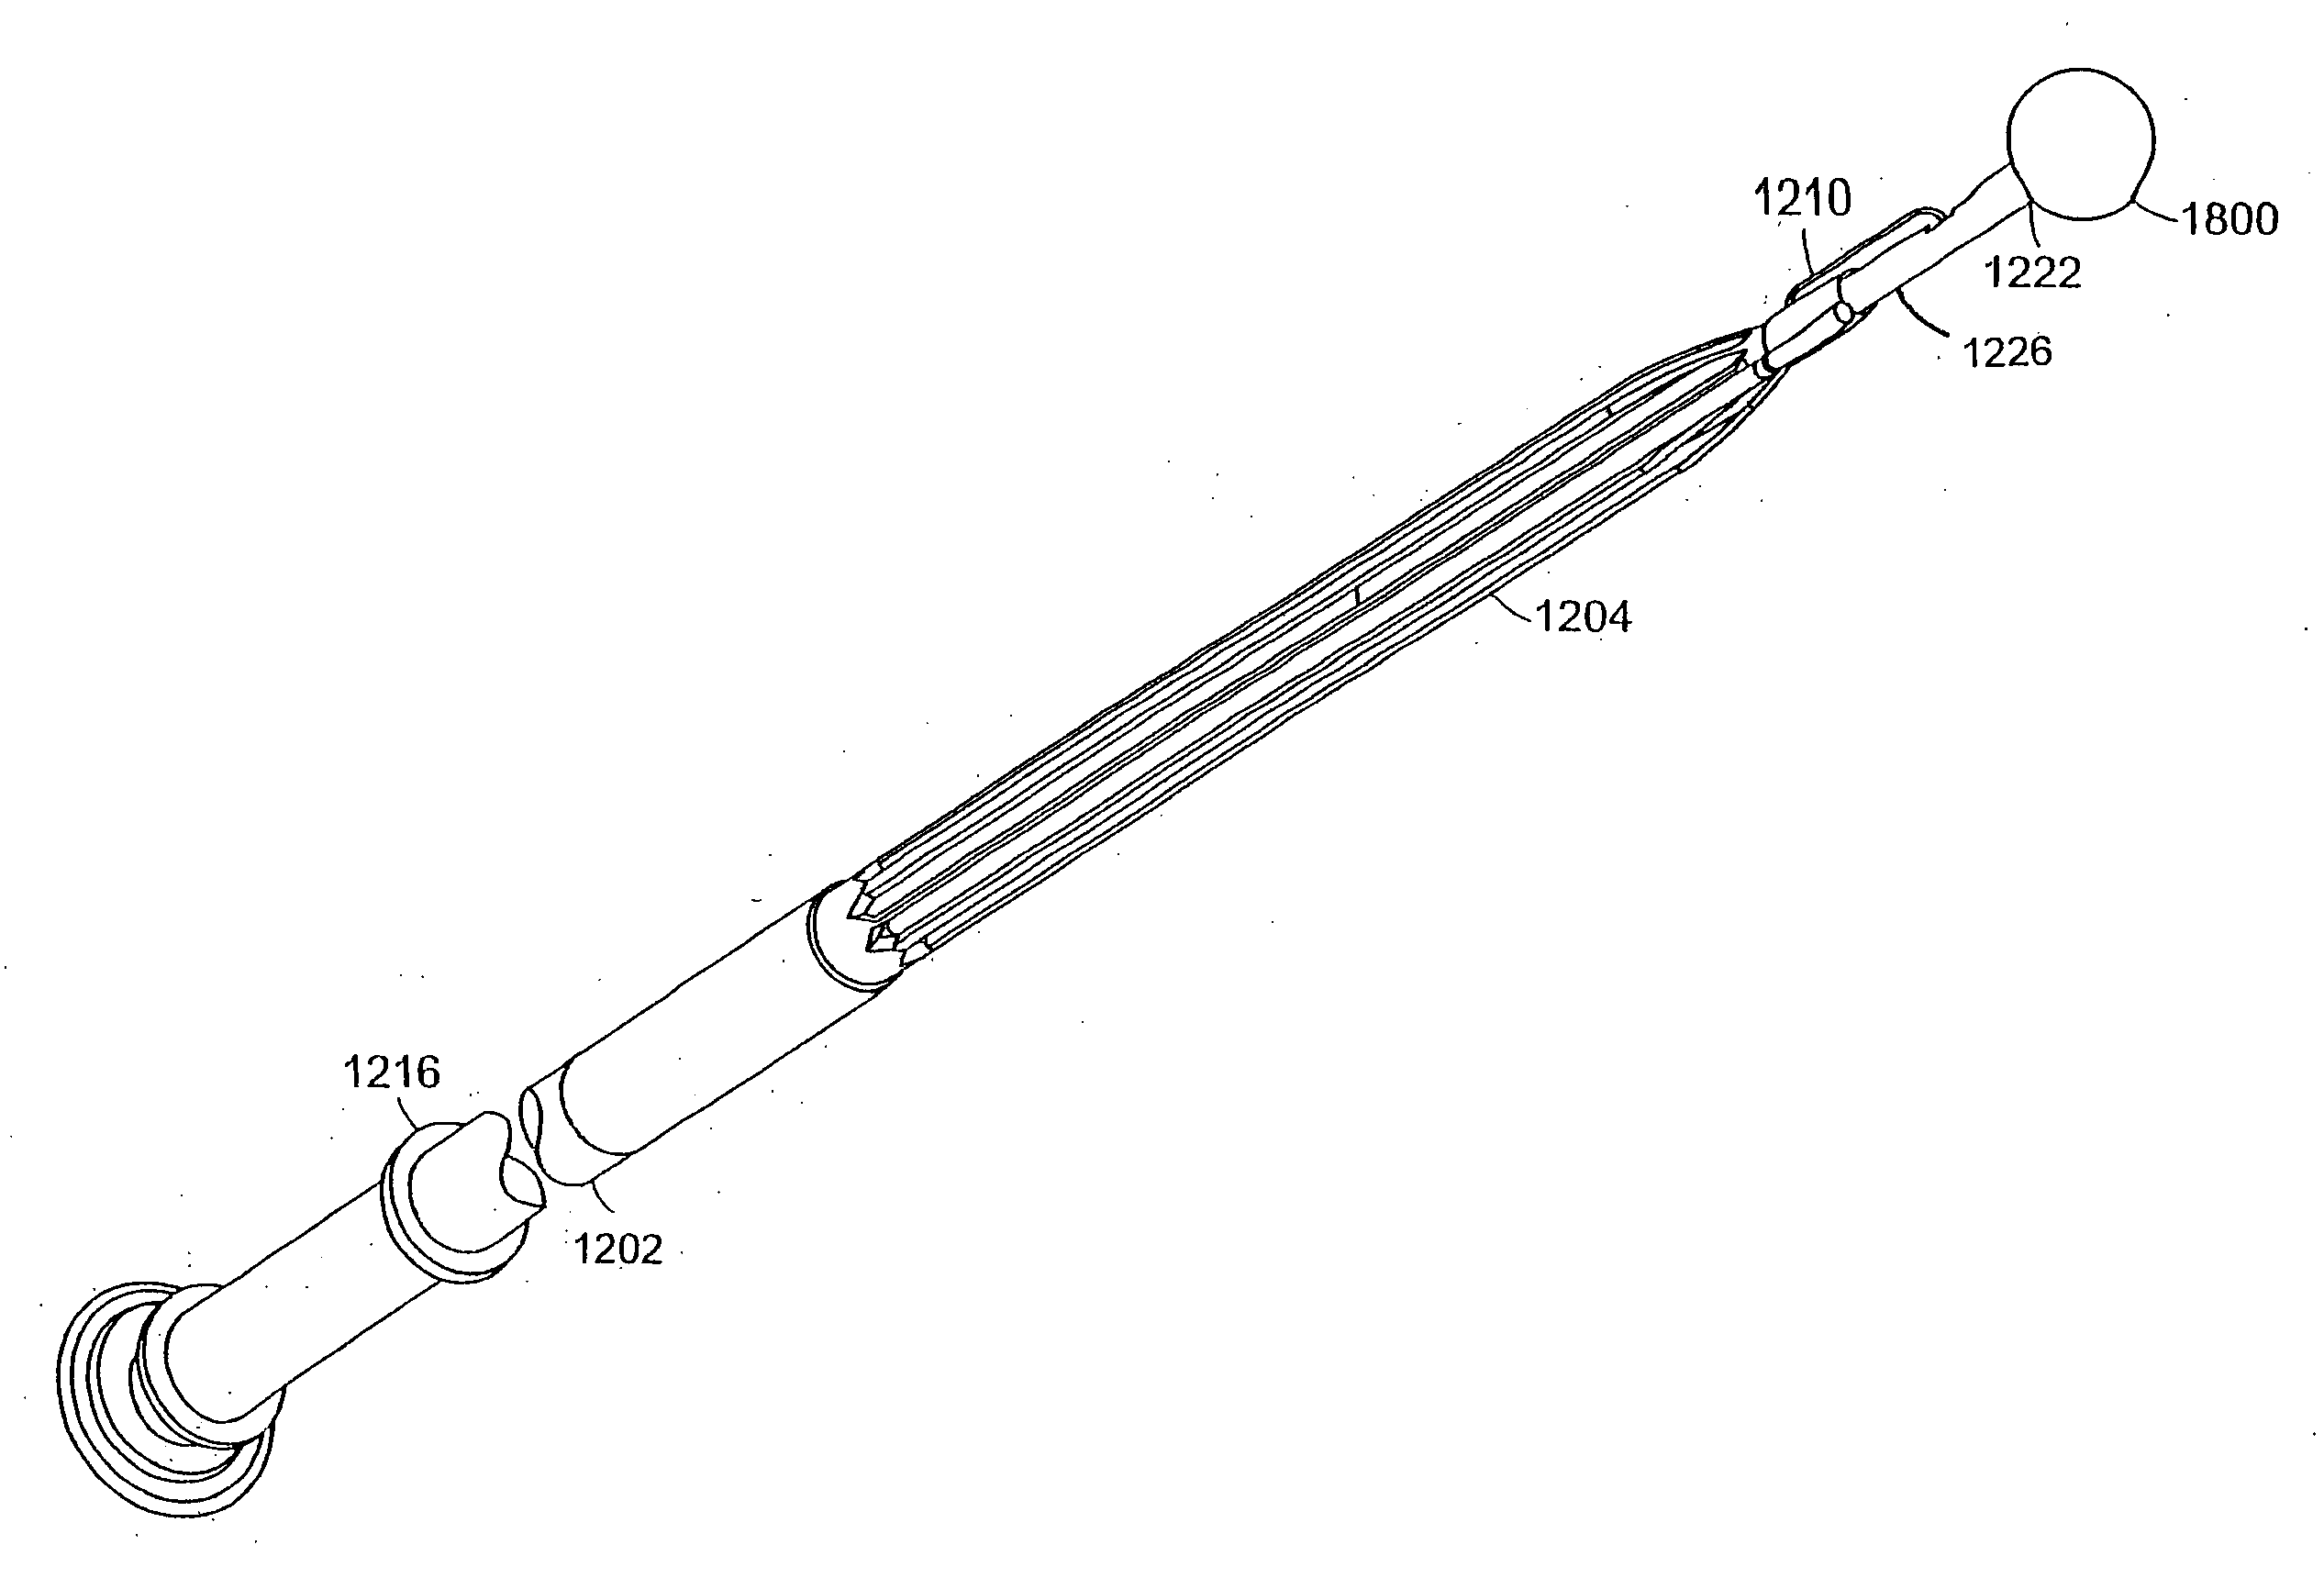 Atraumatic delivery devices